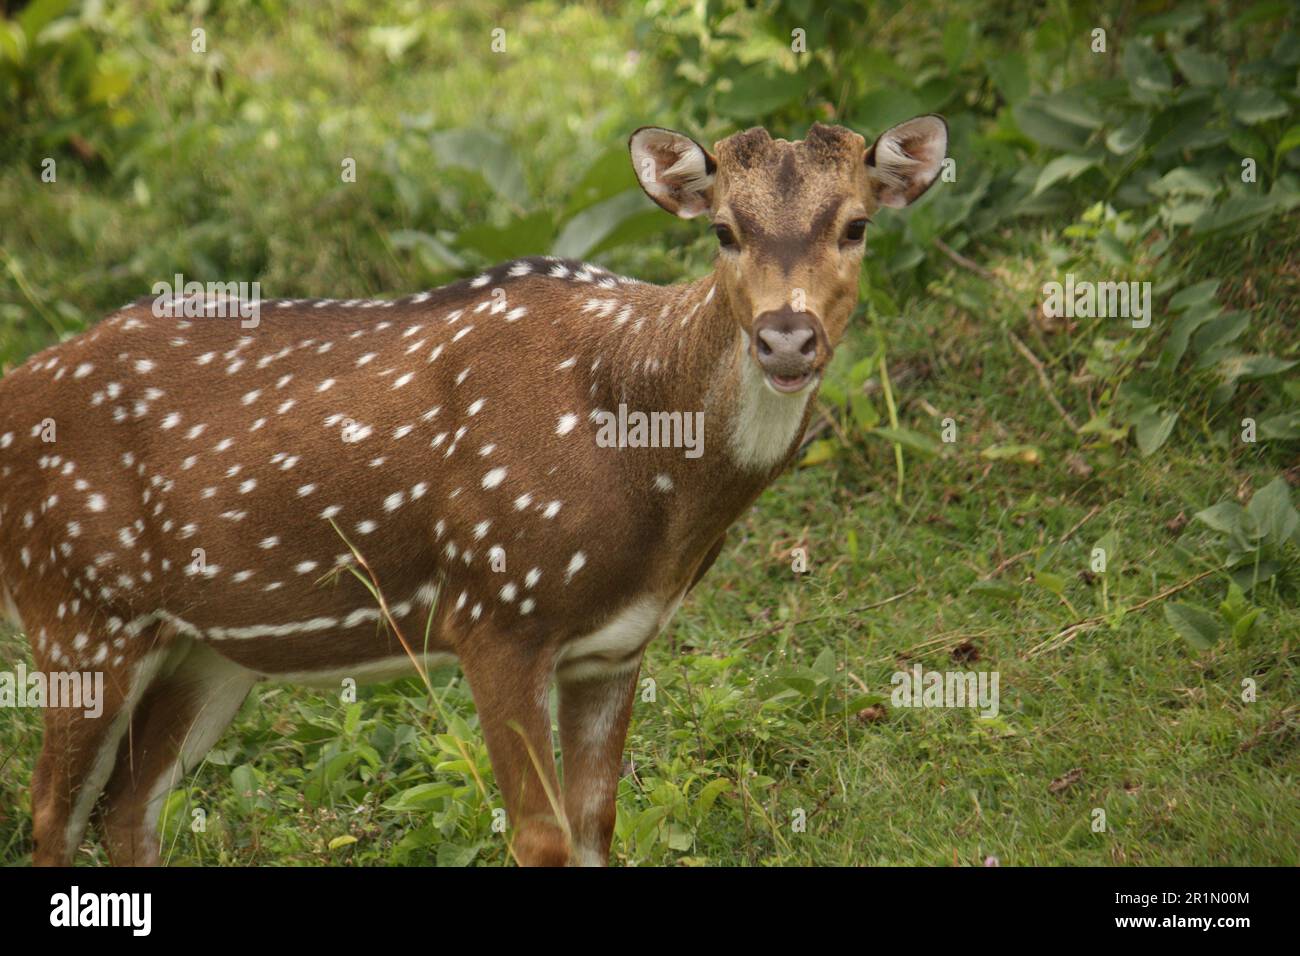 Deer face view Stock Photo